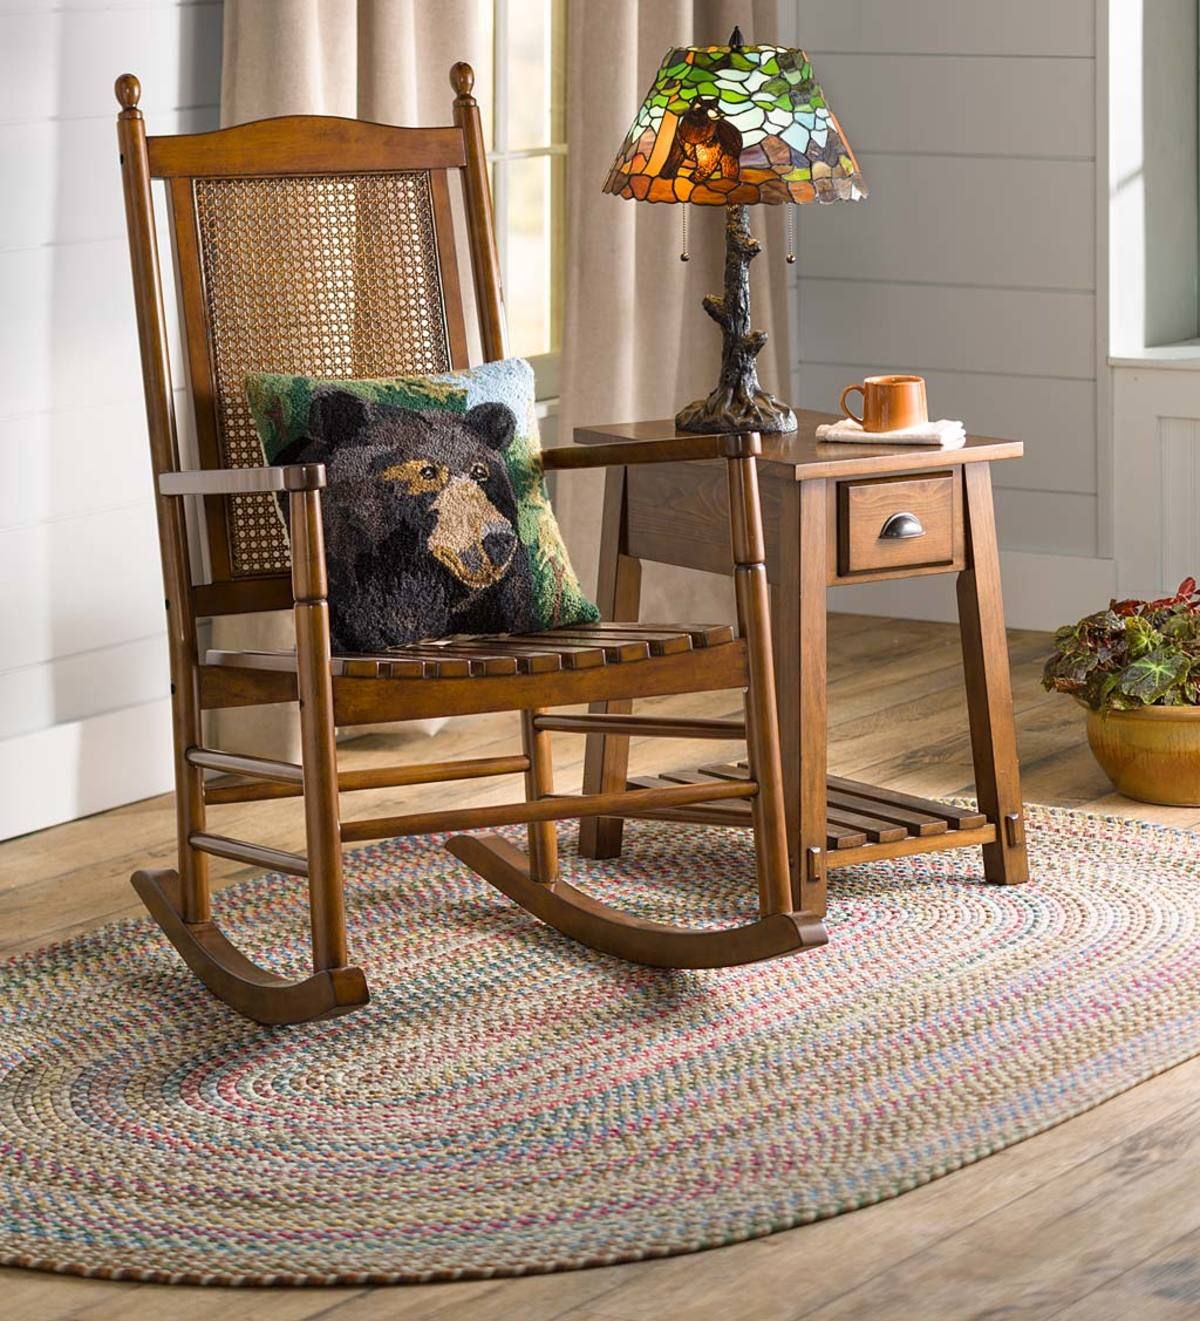 Berkley Birch Rocking Chair With Cane Back | Plowhearth Throughout Warm Brown Slat Back Rocking Chairs (Photo 20 of 20)